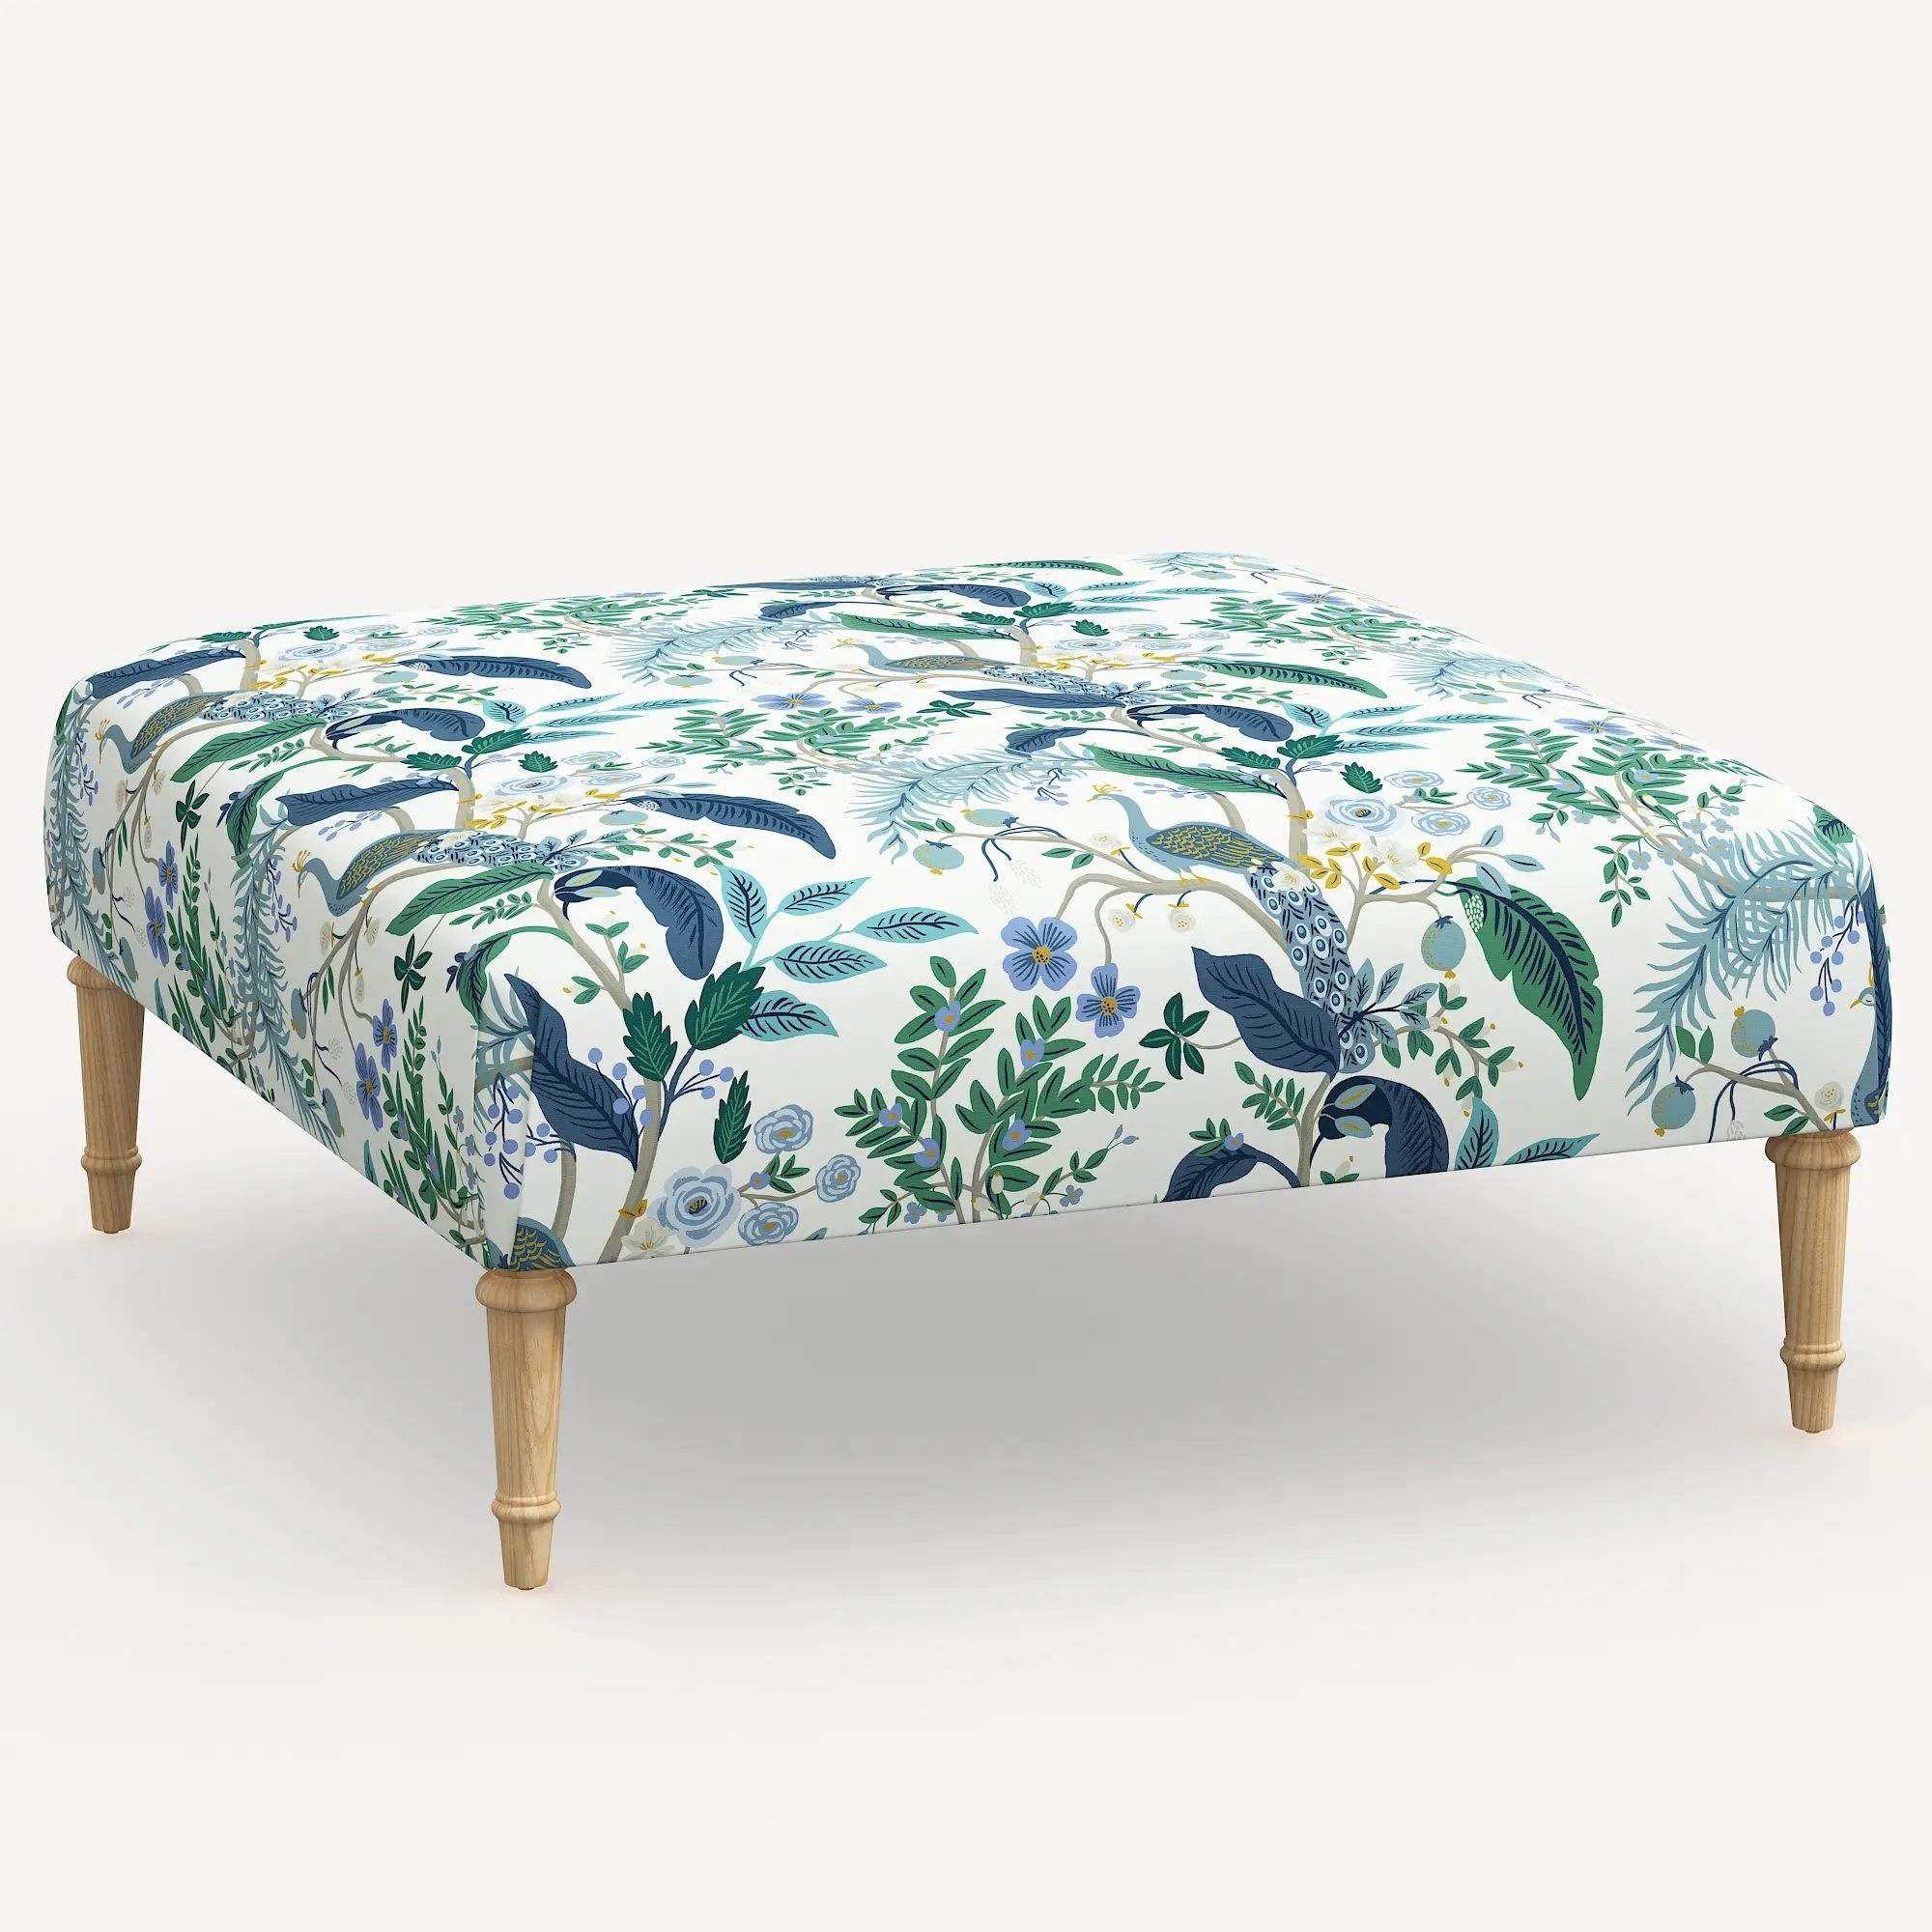 Rifle Paper Co. Greenwich Blue Peacock Ottoman with Natural Legs